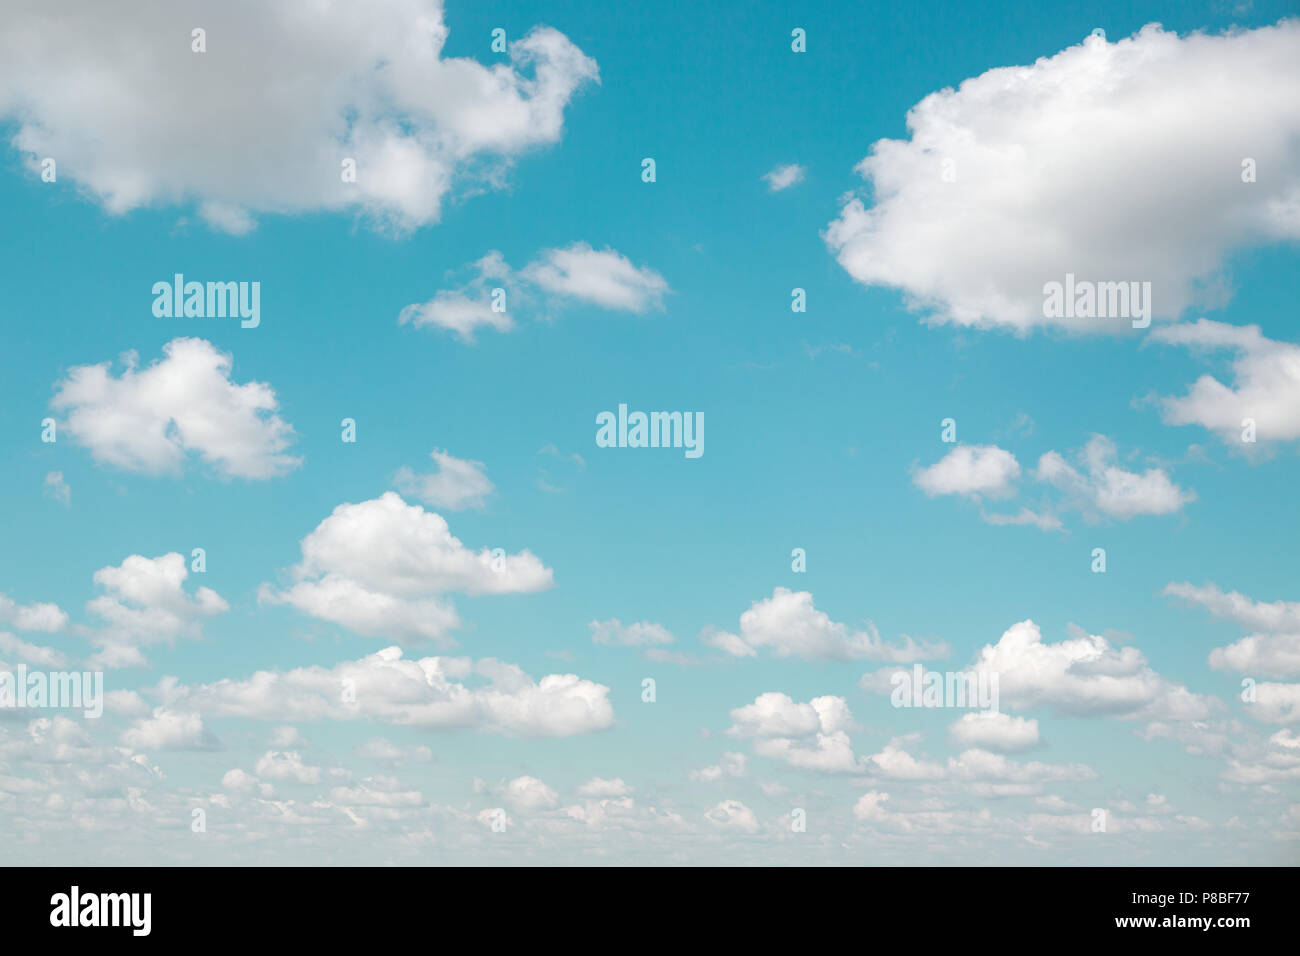 Background of white fluffy clouds and blue sky with vintage filter. Gradient celestial azure cloudscape. Good weather. Stock Photo